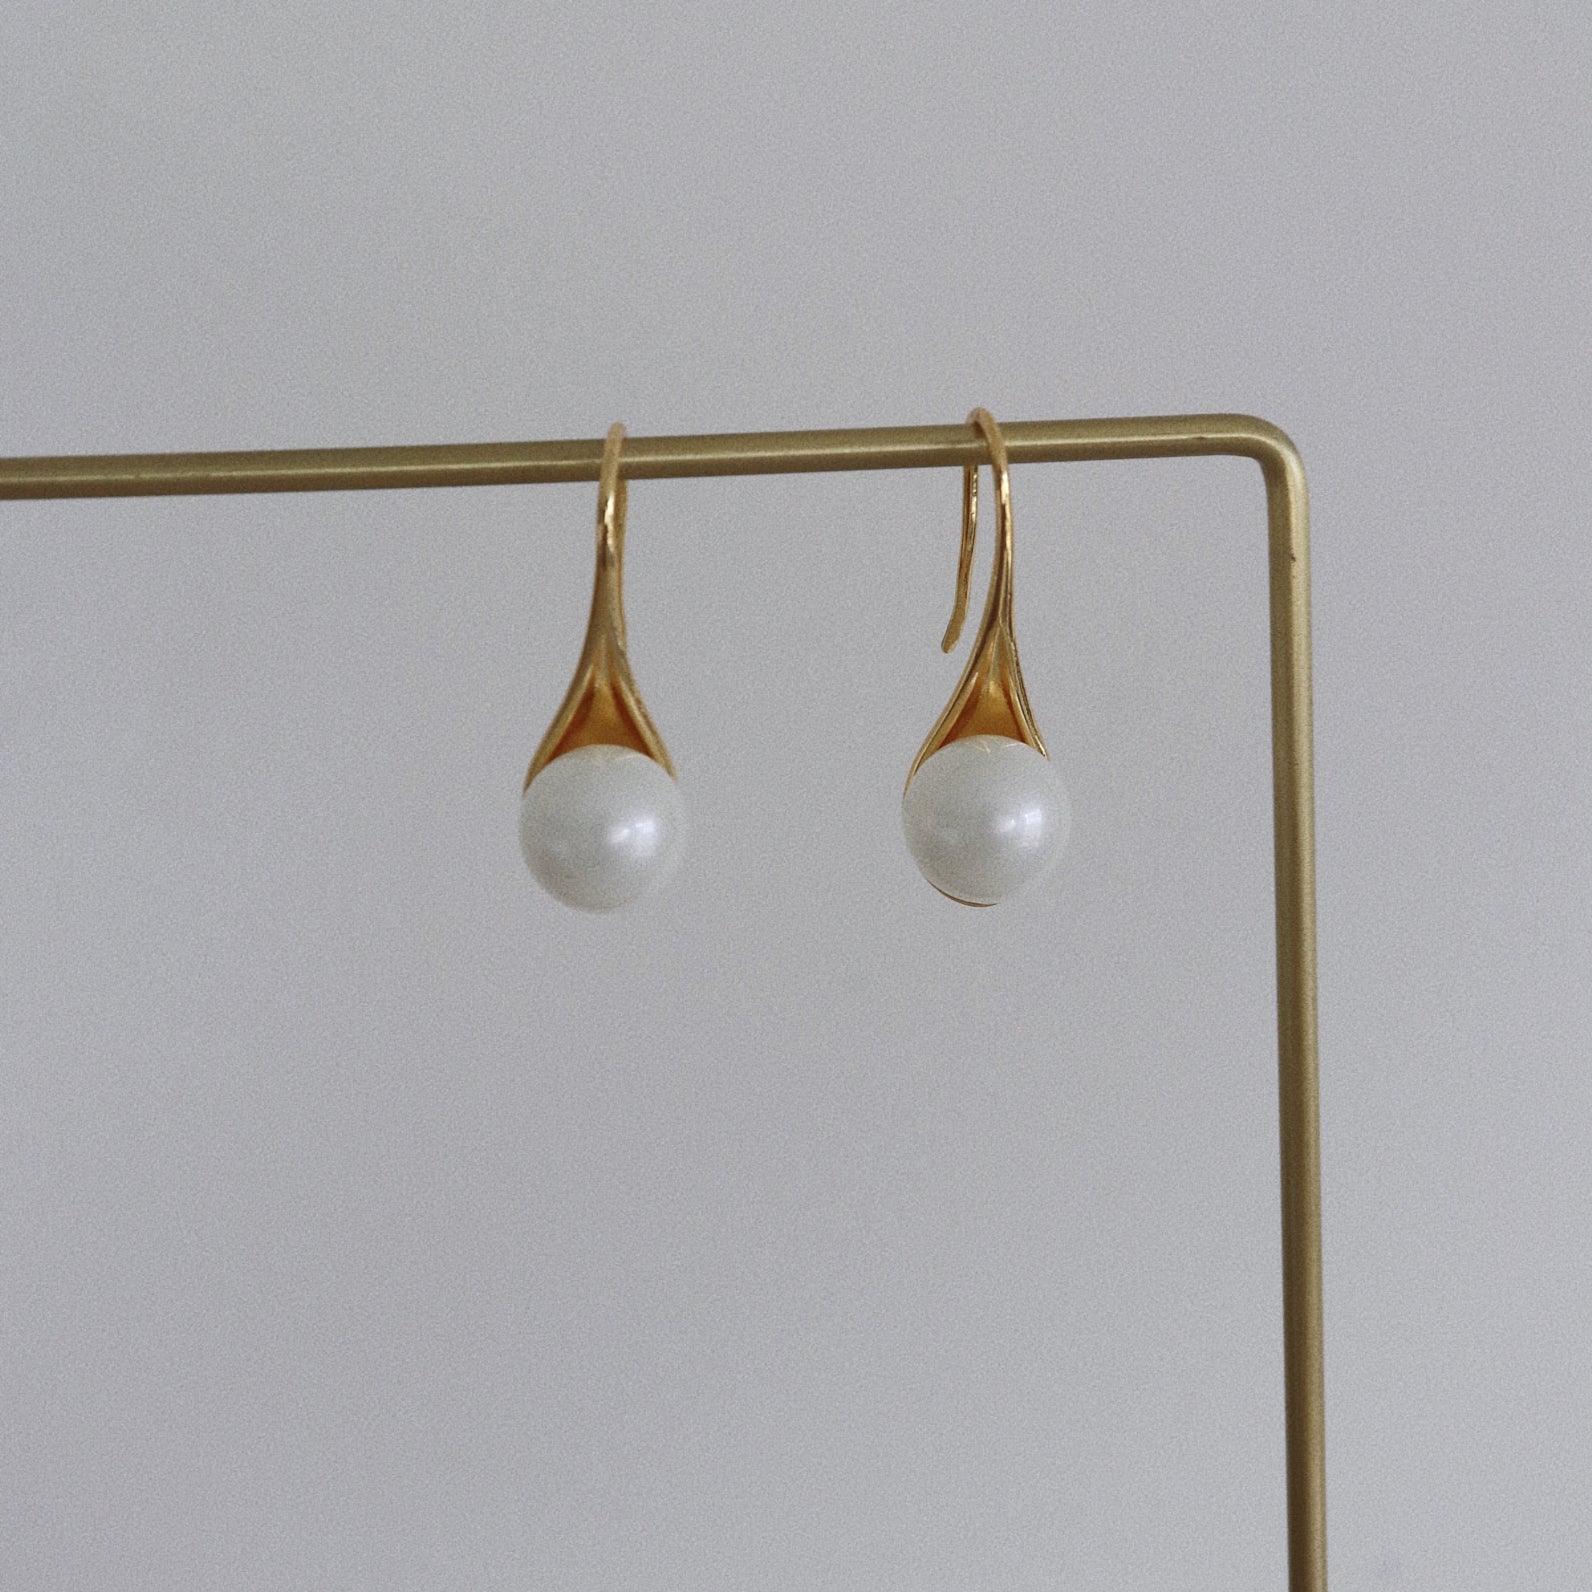 Stylish and Water-Resistant Gold Plated pearl earrings- Perfect timeless necessary for every occasion